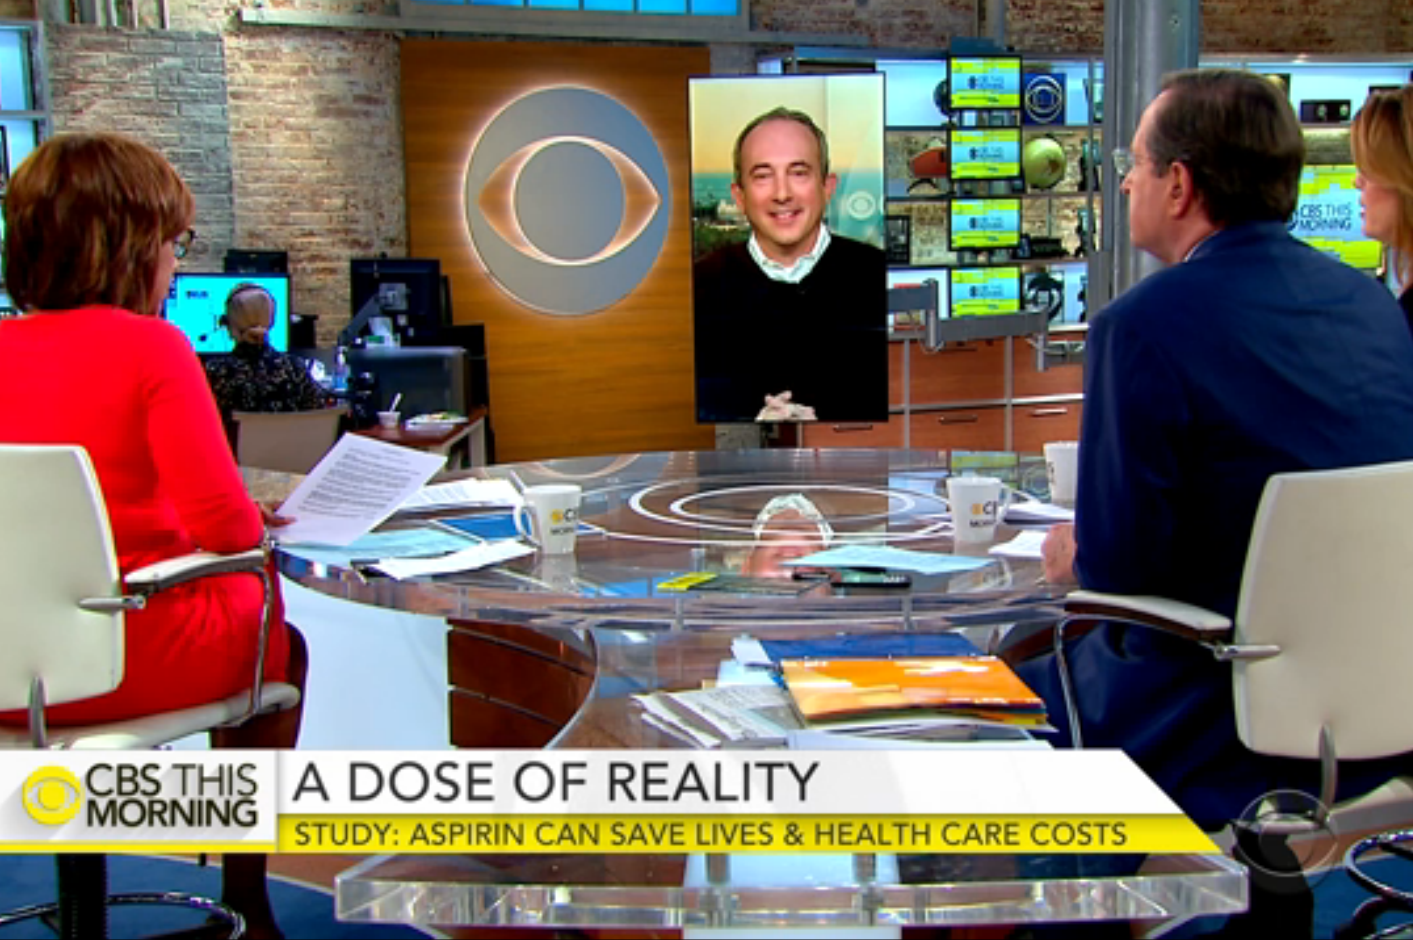 CBS This Morning screenshot. A Dose of Reality Study: Aspirin can save lives and health care costs.